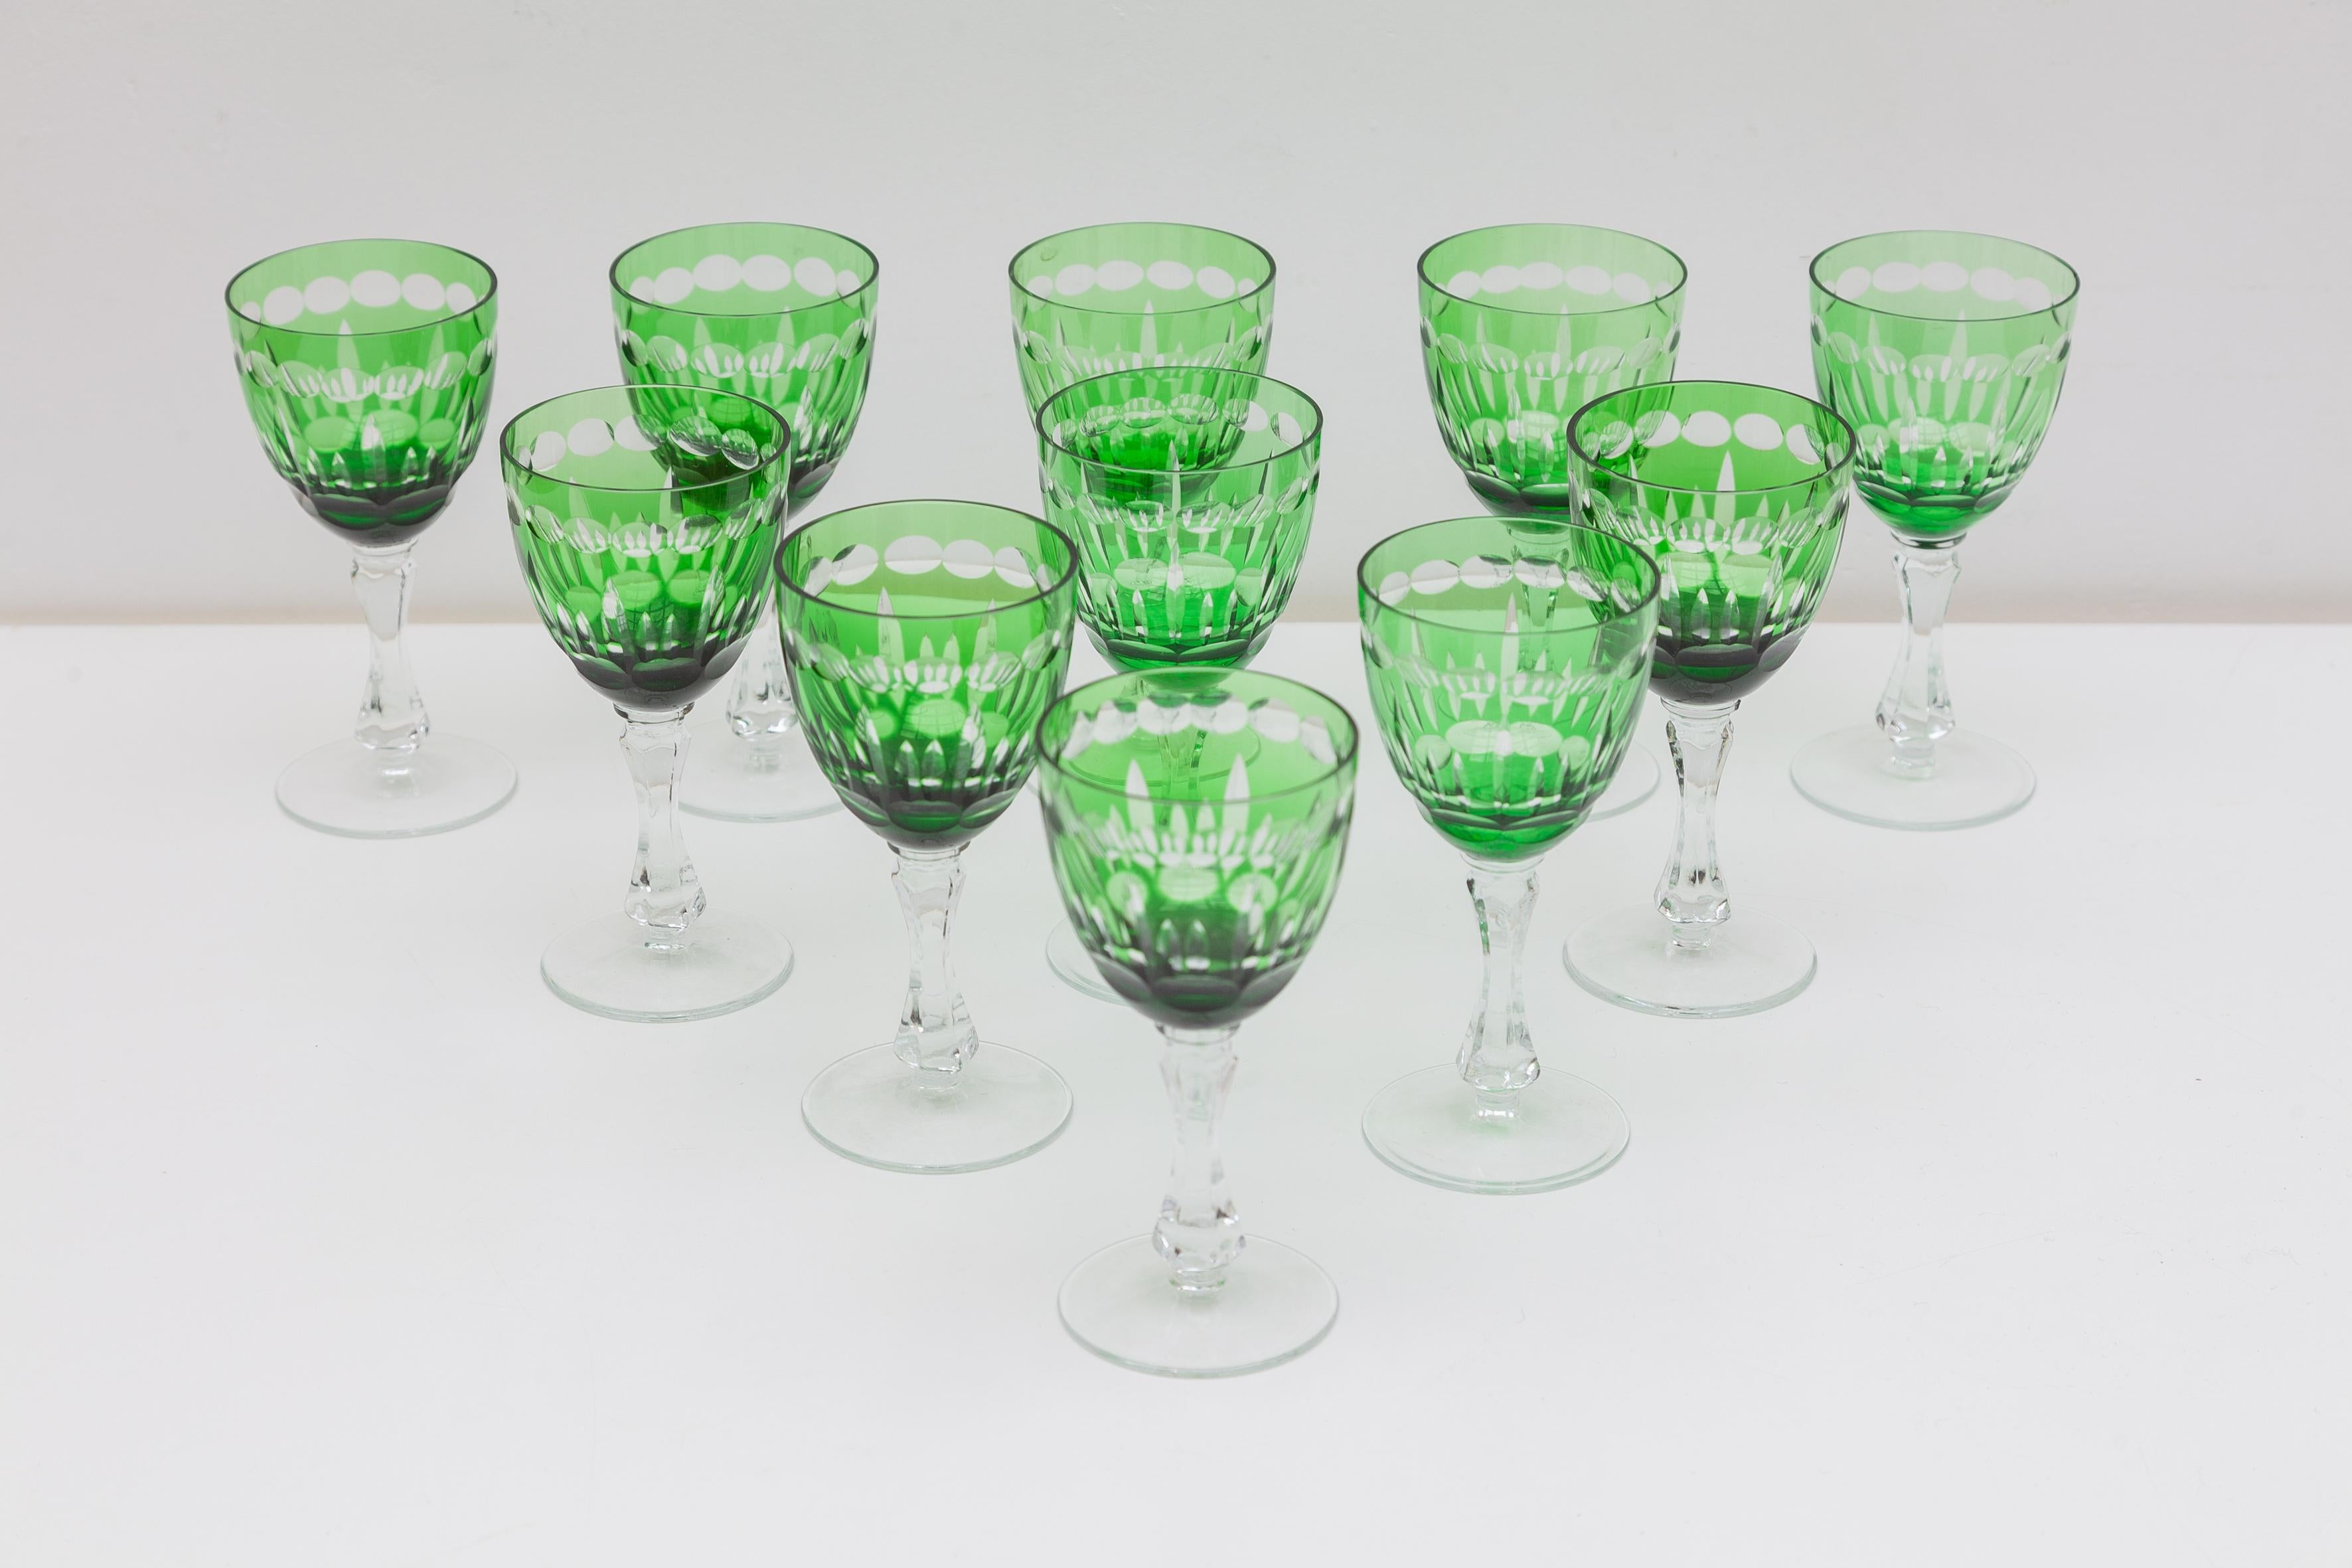 Vintage midcentury barware set. Faceted crystal goblets in green and clear glass. Perfect for cocktails or serving wine. Set of eleven pieces all in perfect condition, no chips.